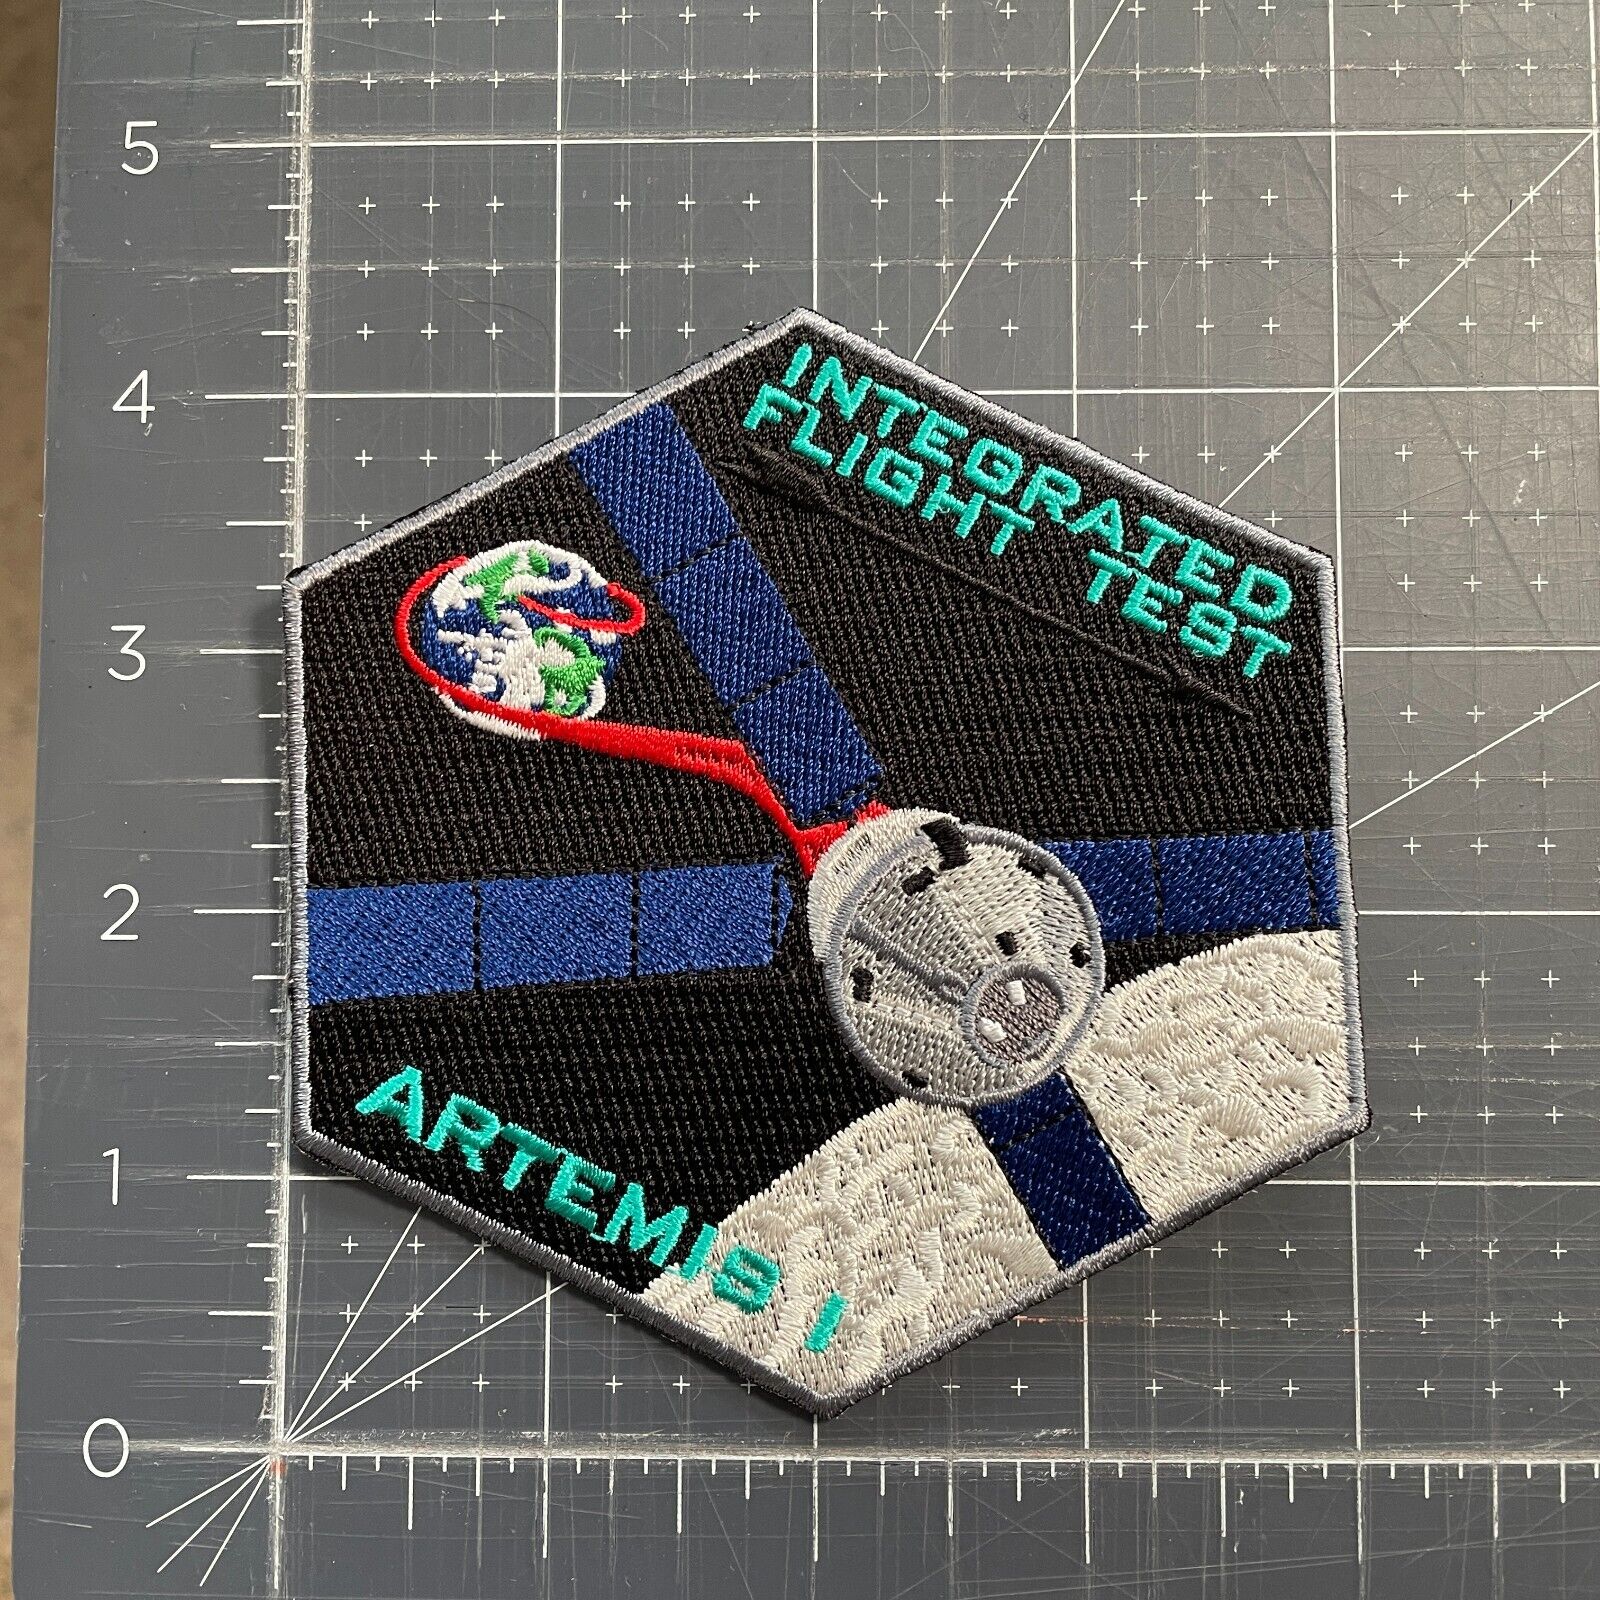 Artemis 1 IFT Integrated Flight Test NASA Patch, 1 in a series